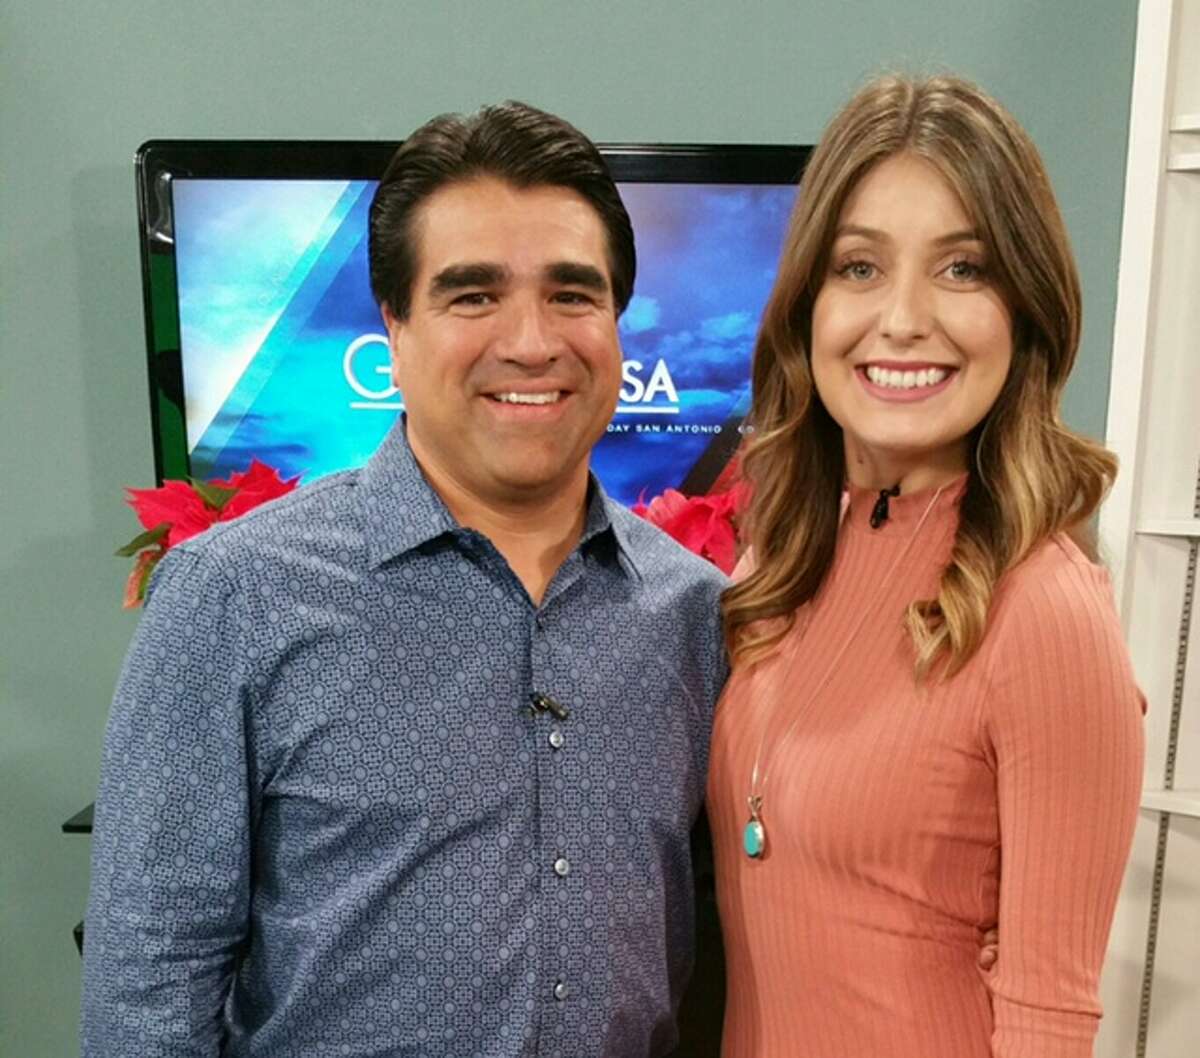 'Great Day' newcomer Roma Villavicencio and co-host Paul Mireles will pinch-hit until new host is named.